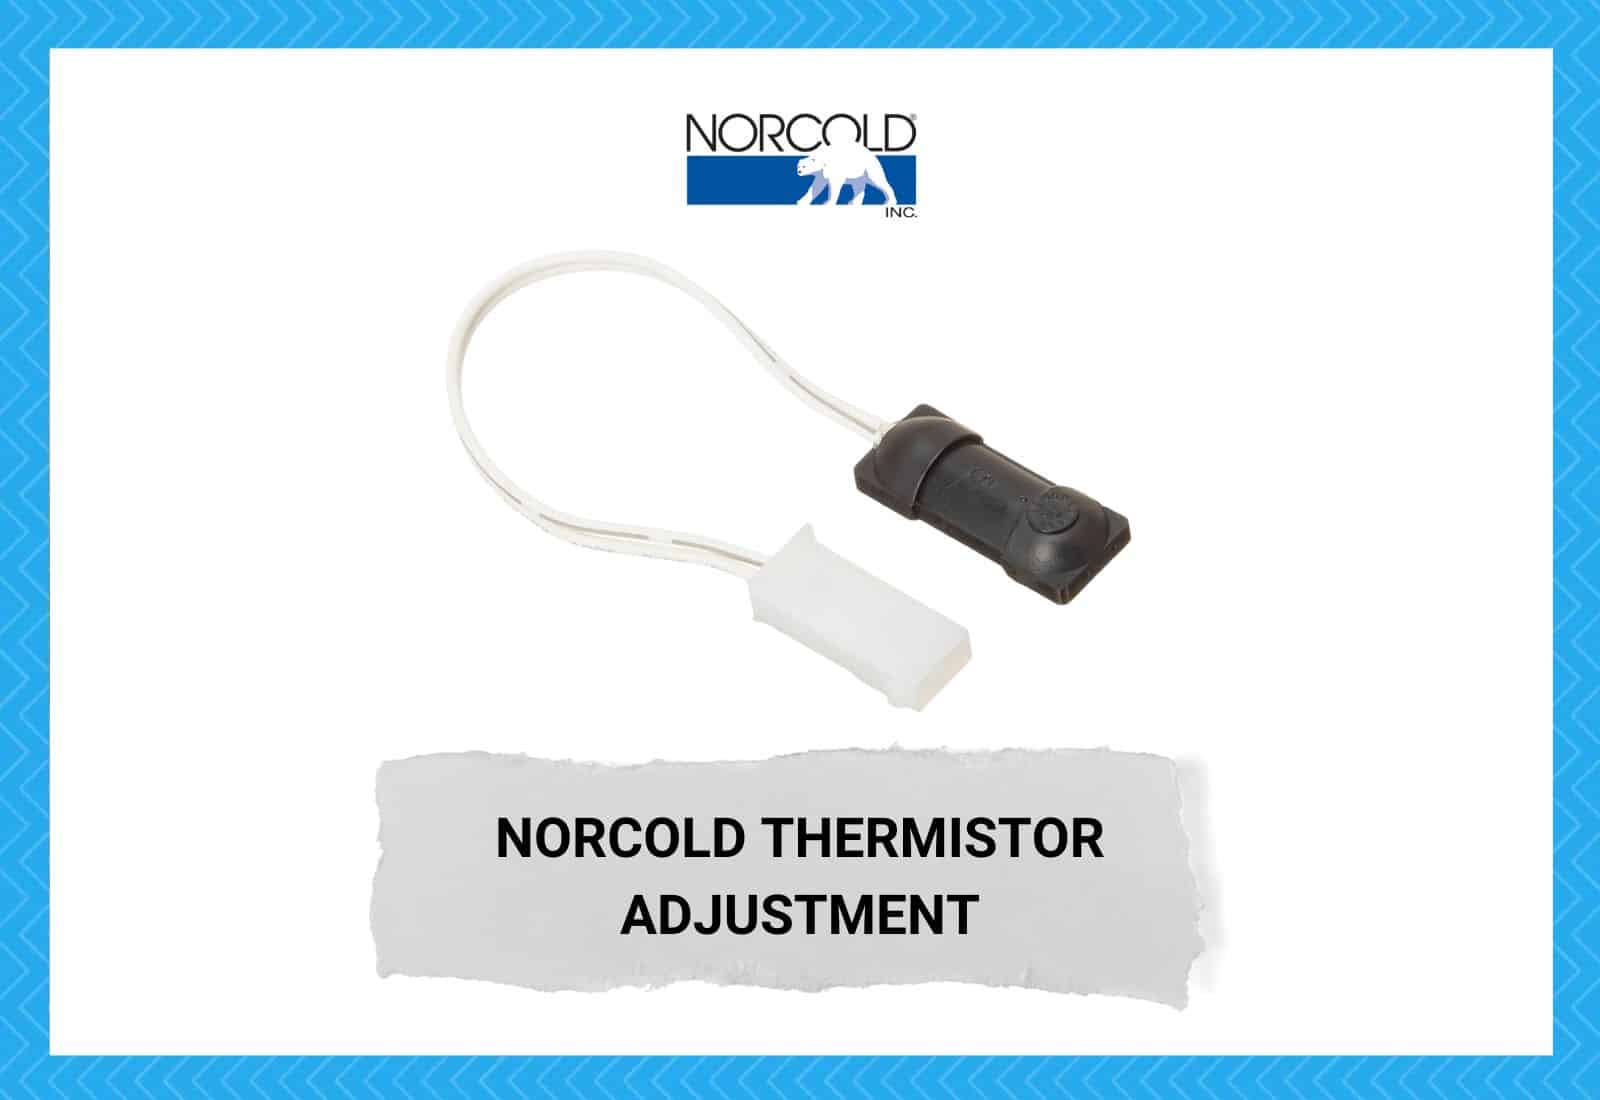 Norcold Thermistor Adjustment